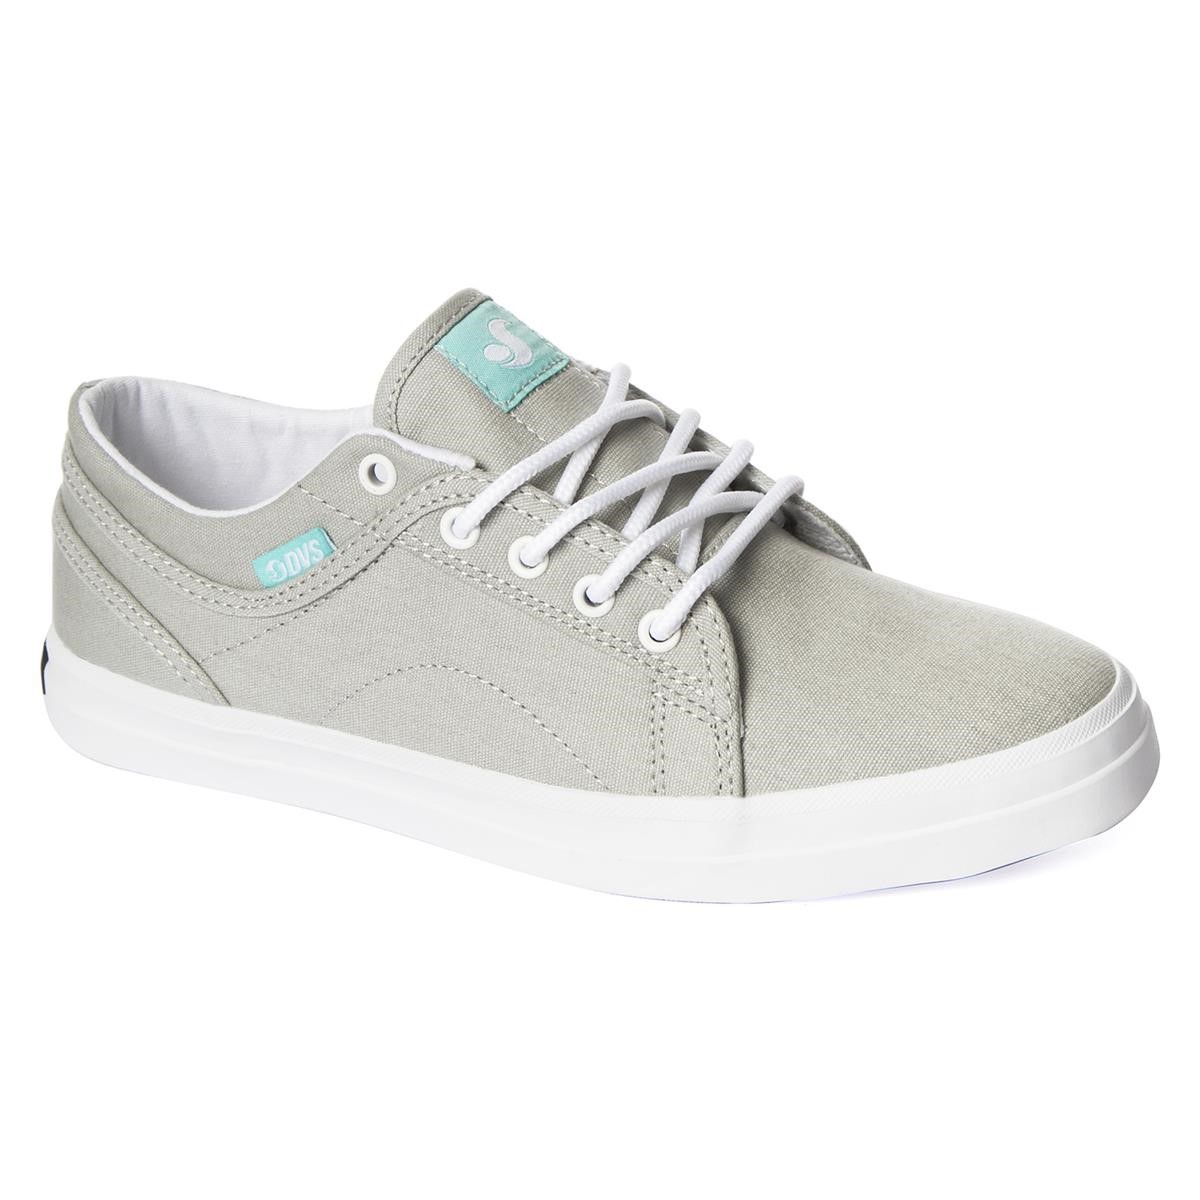 canvas shoes for girls with price